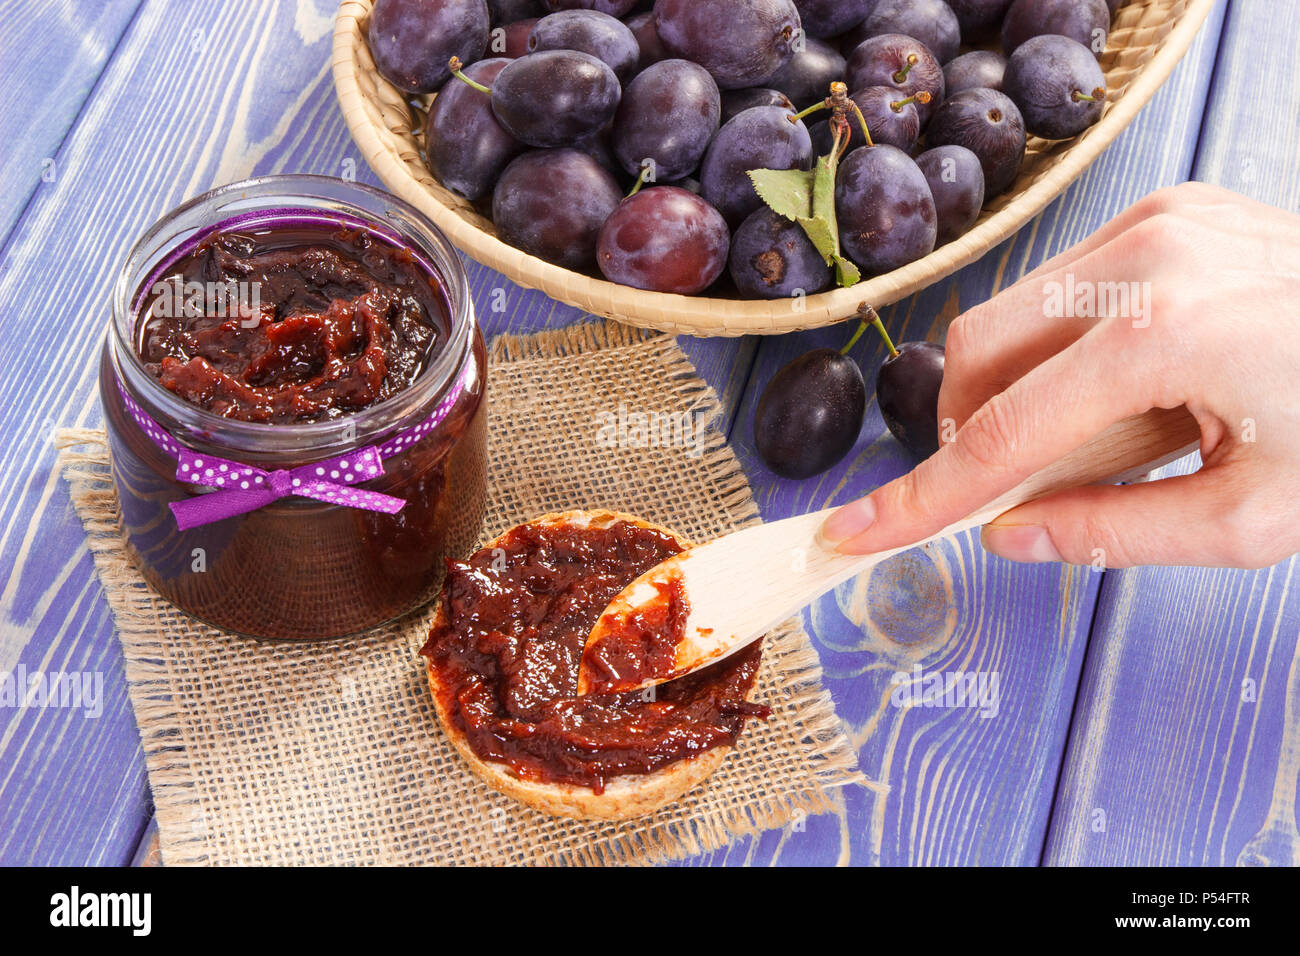 Hand with knife preparing fresh sandwiches with plum marmalade or jam, concept of healthy sweet snack, breakfast or dessert Stock Photo